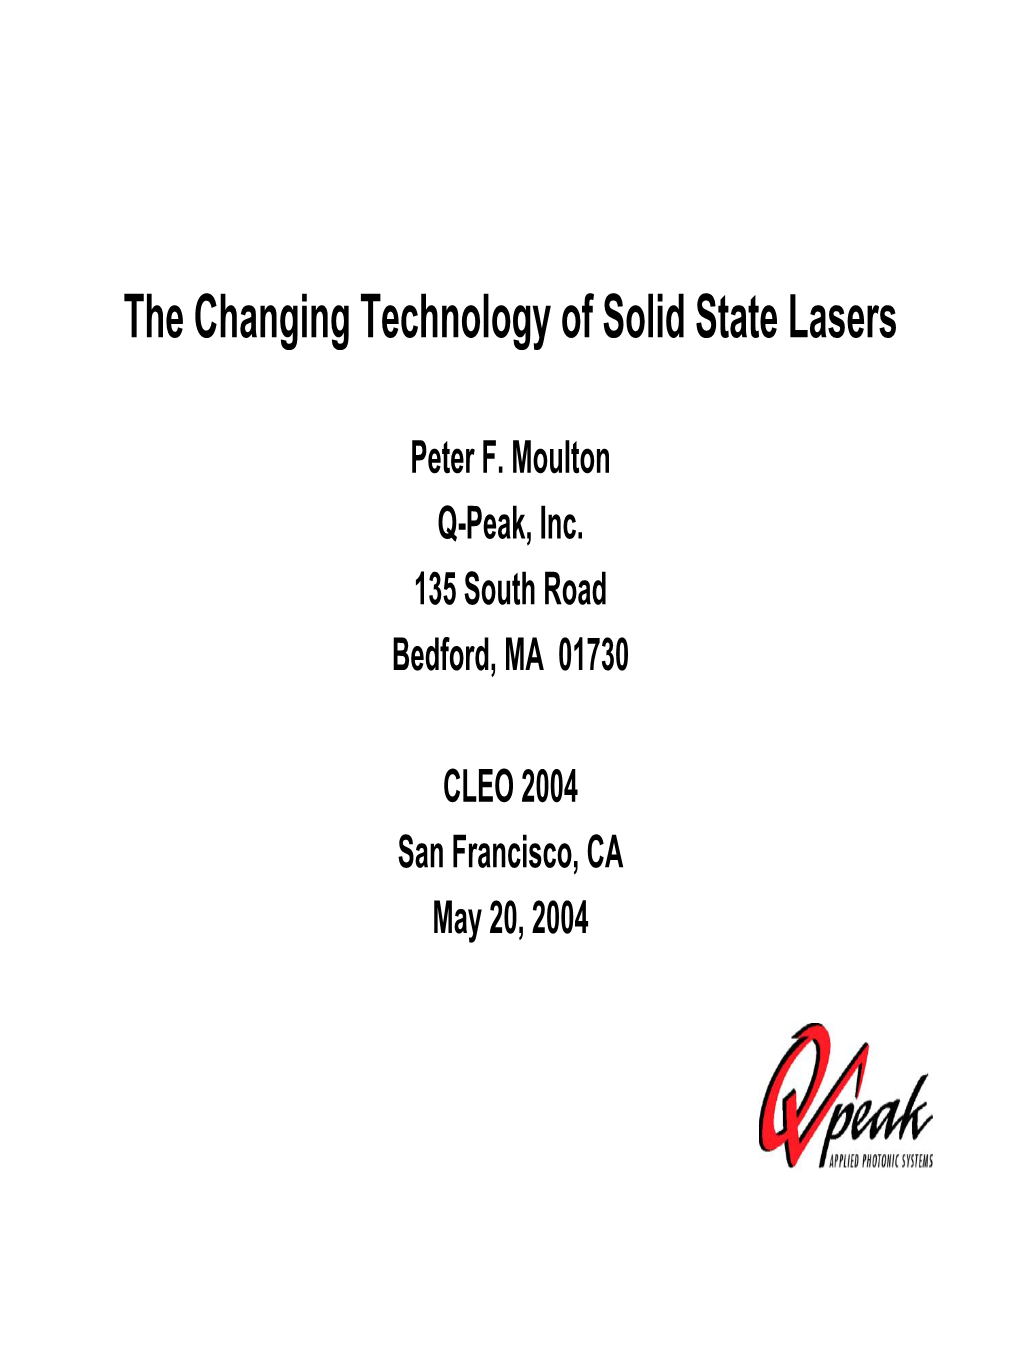 The Changing Technology of Solid State Lasers